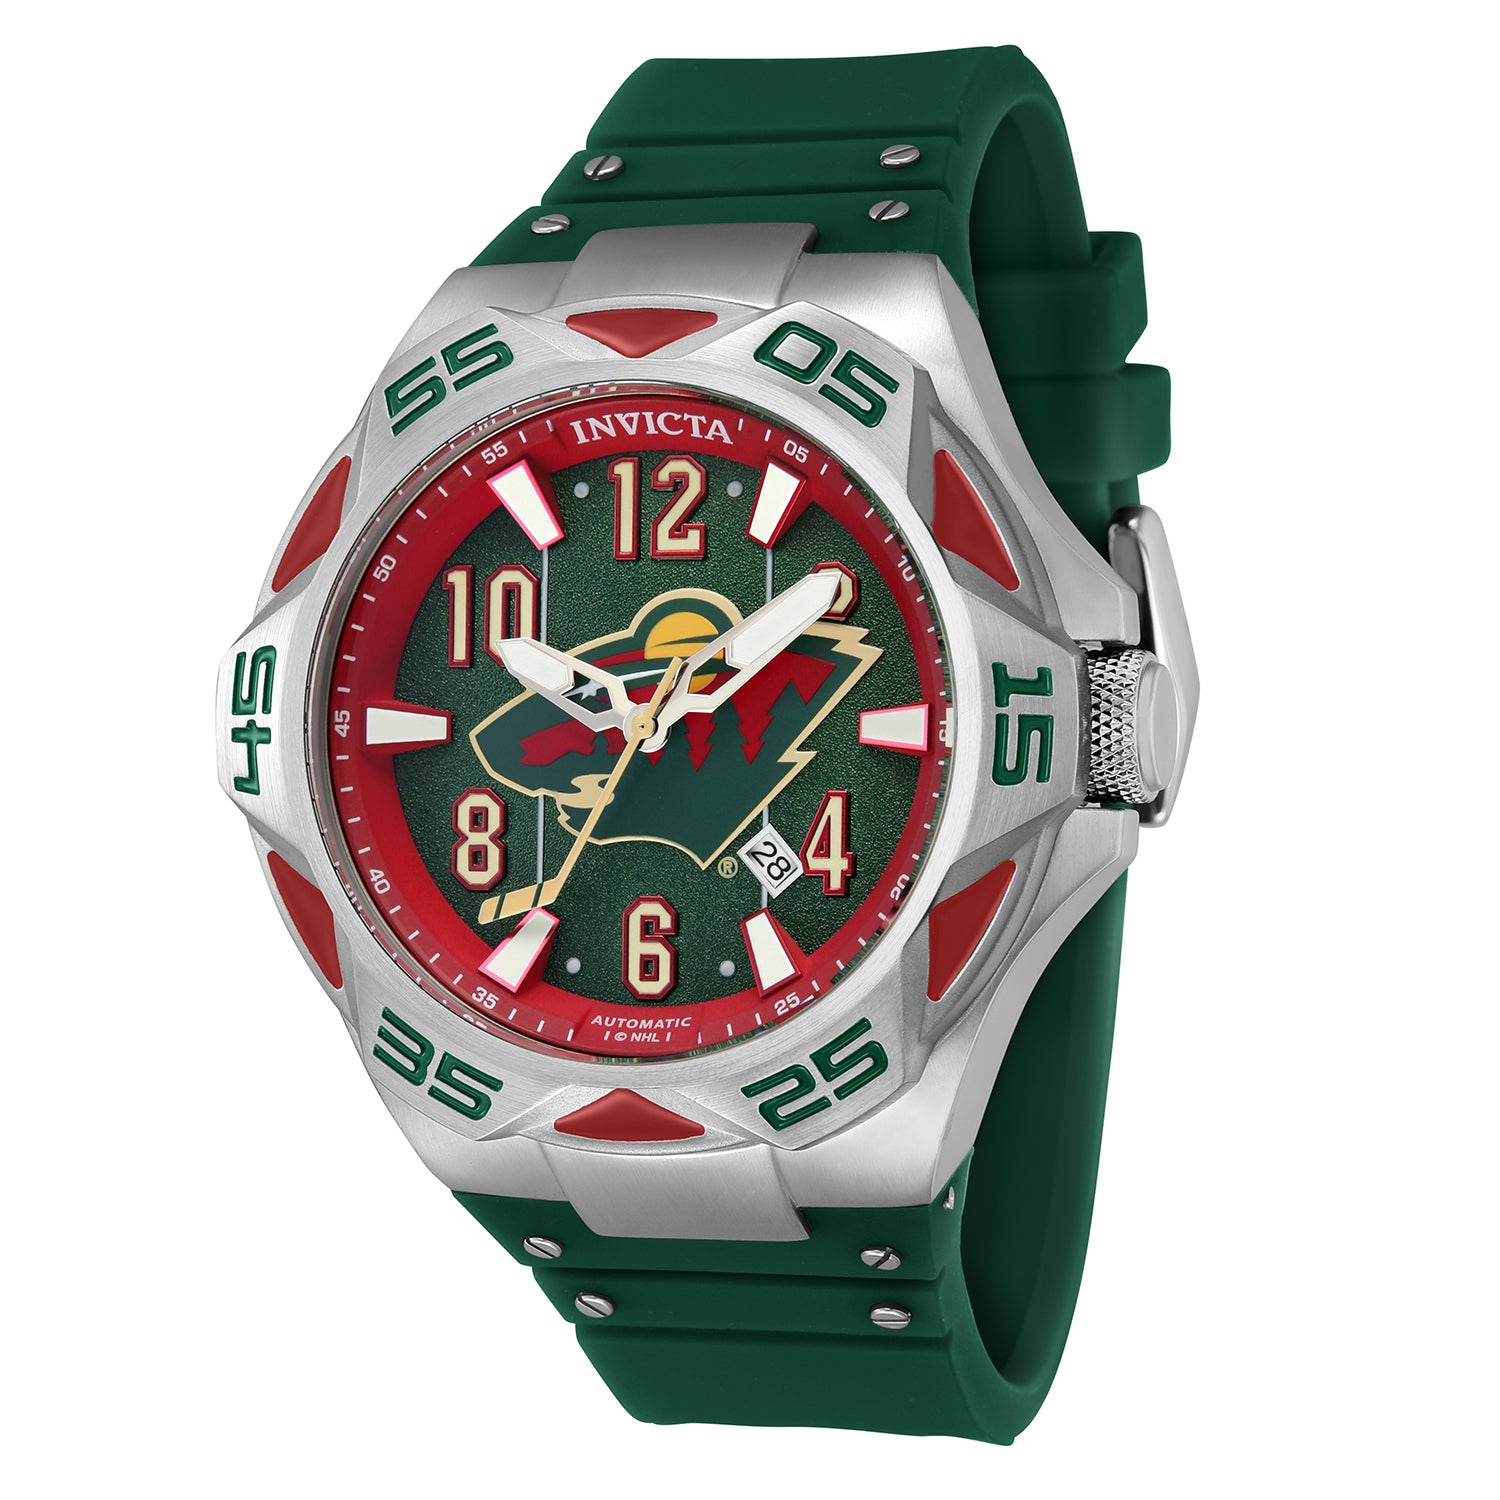 title:Invicta Men's IN-42275 52mm Green Dial Automatic Watch;color:Green